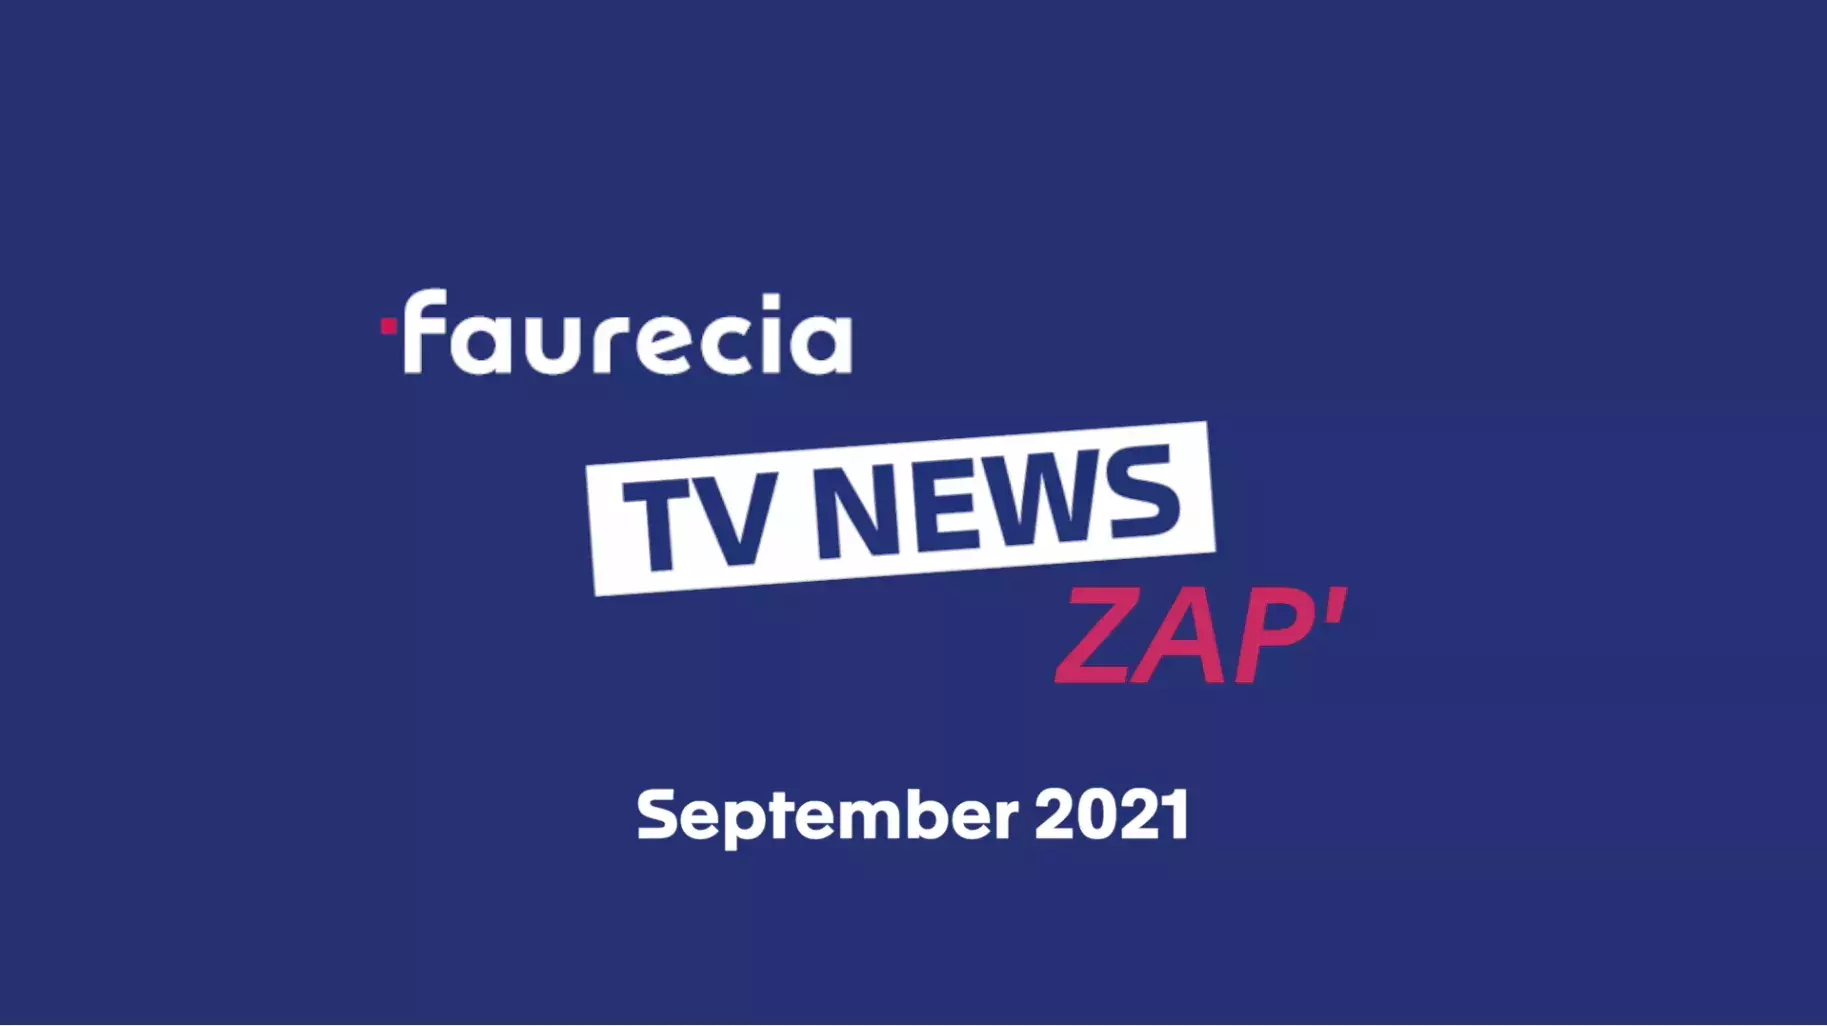 Updates from the Group – September 2021 Faurecia TV News Zap